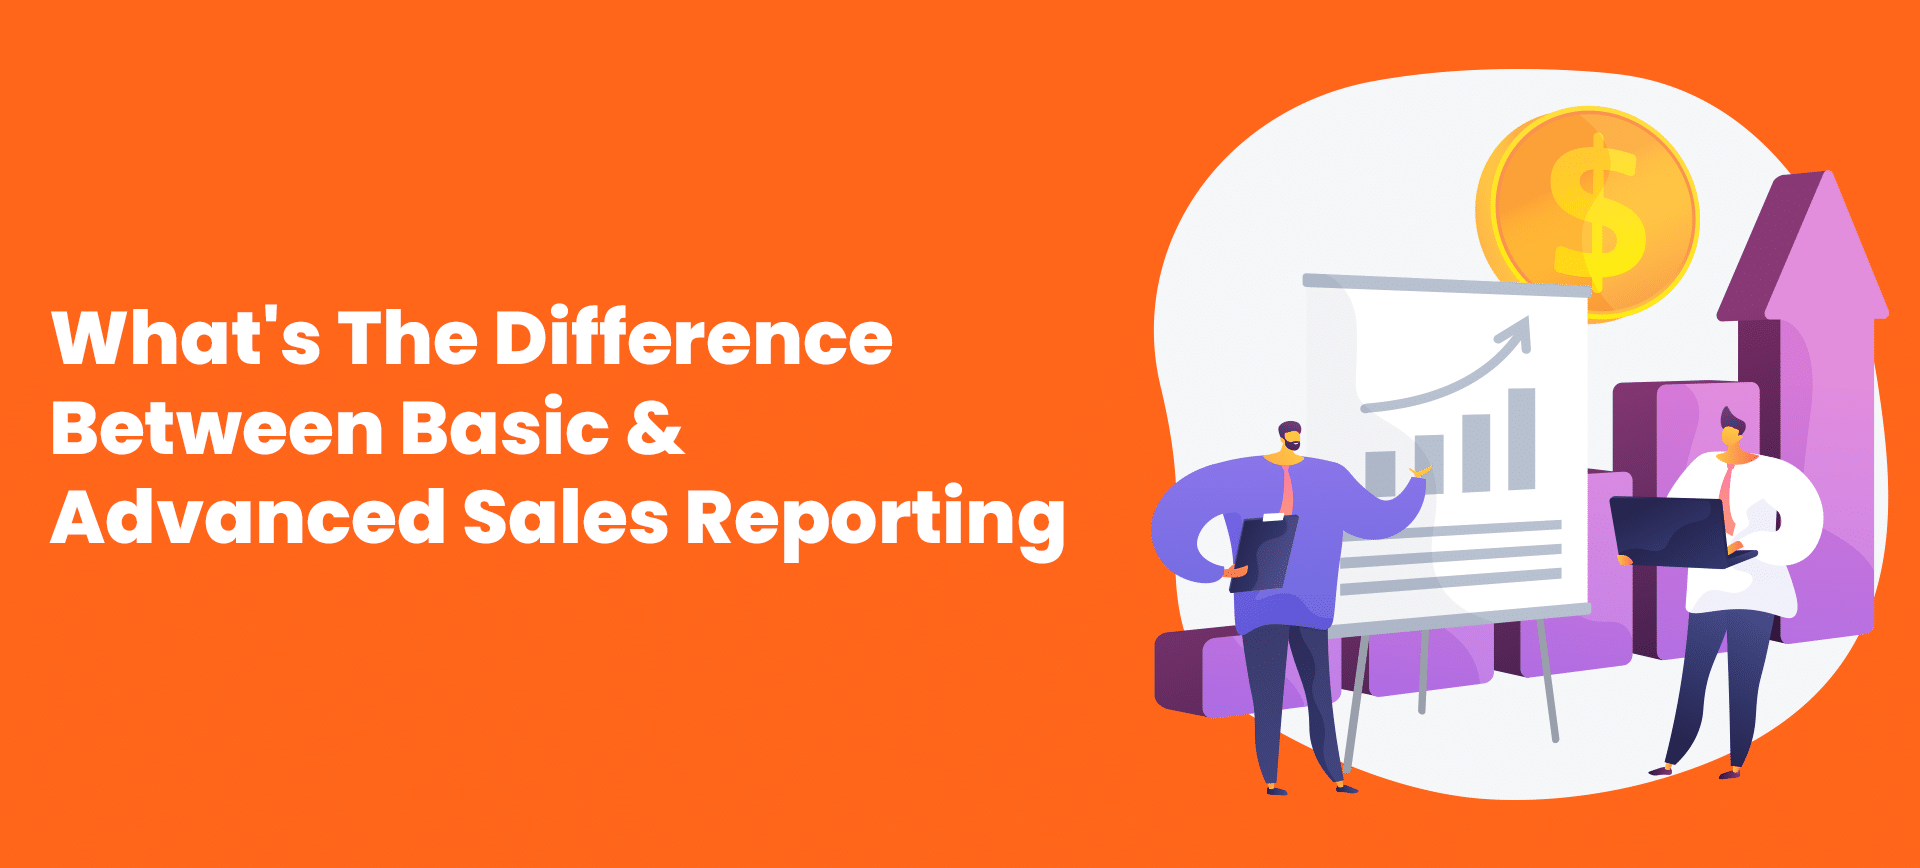 What’s The Difference Between Basic & Advanced Sales Reporting